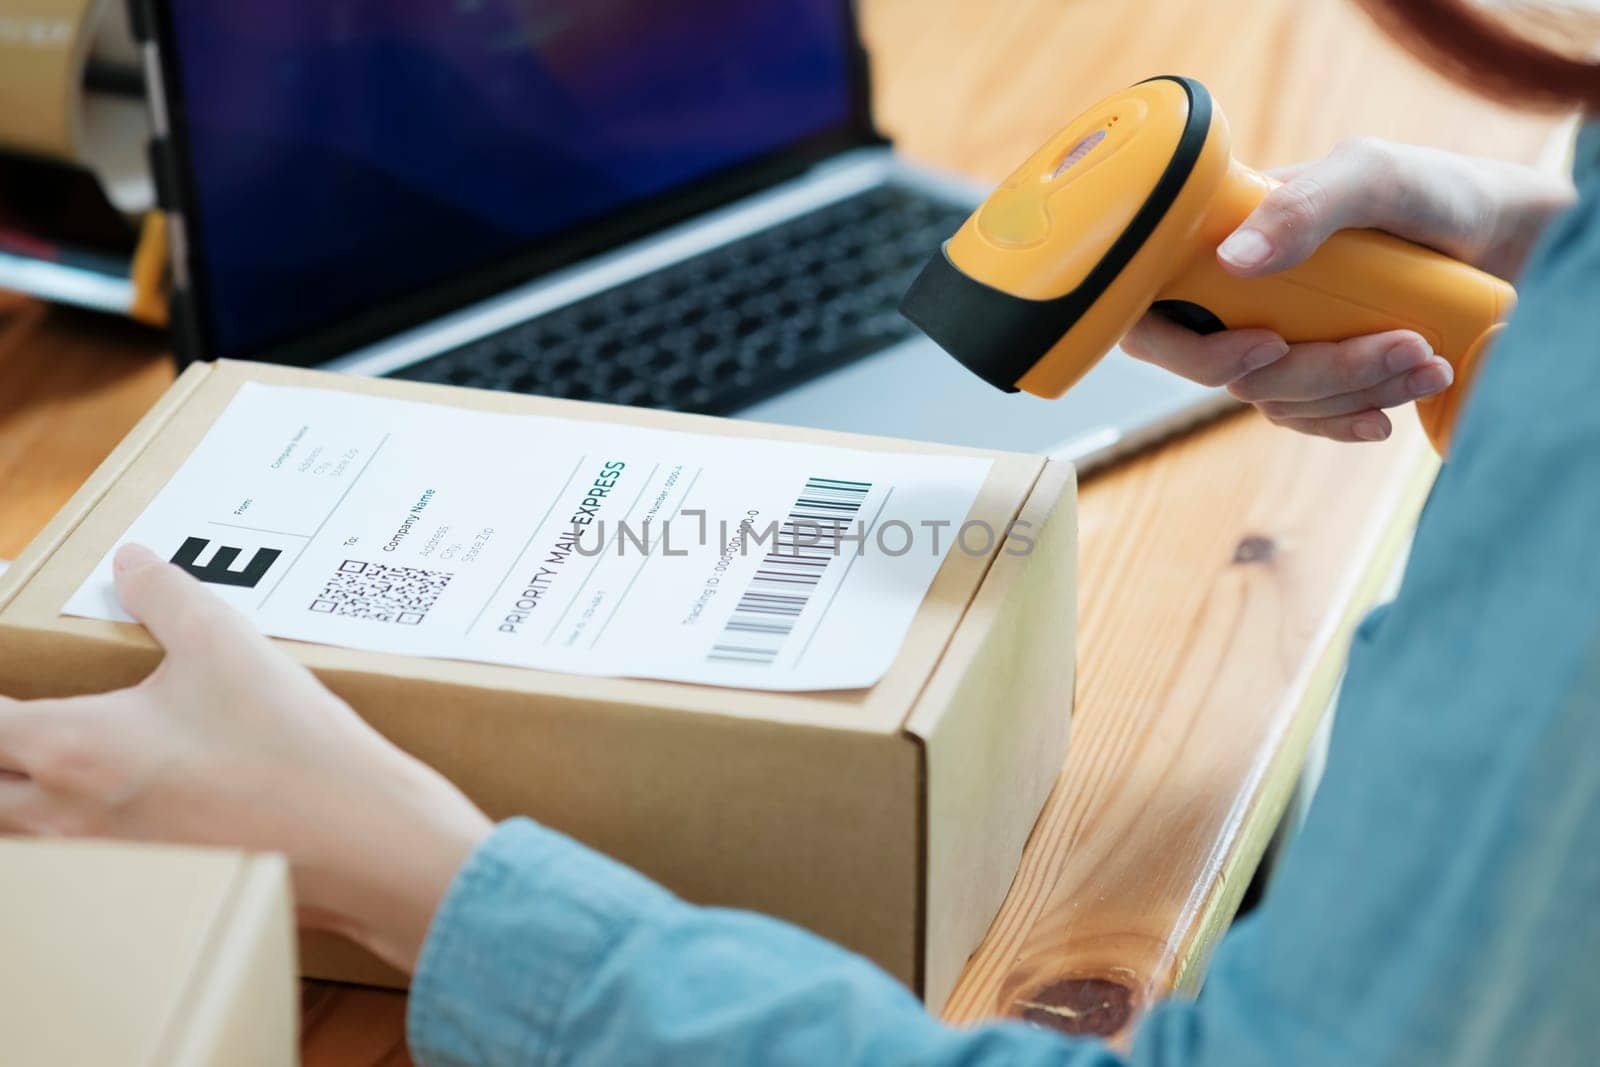 Scanning Barcode on Shipping Box with Scanner by ijeab